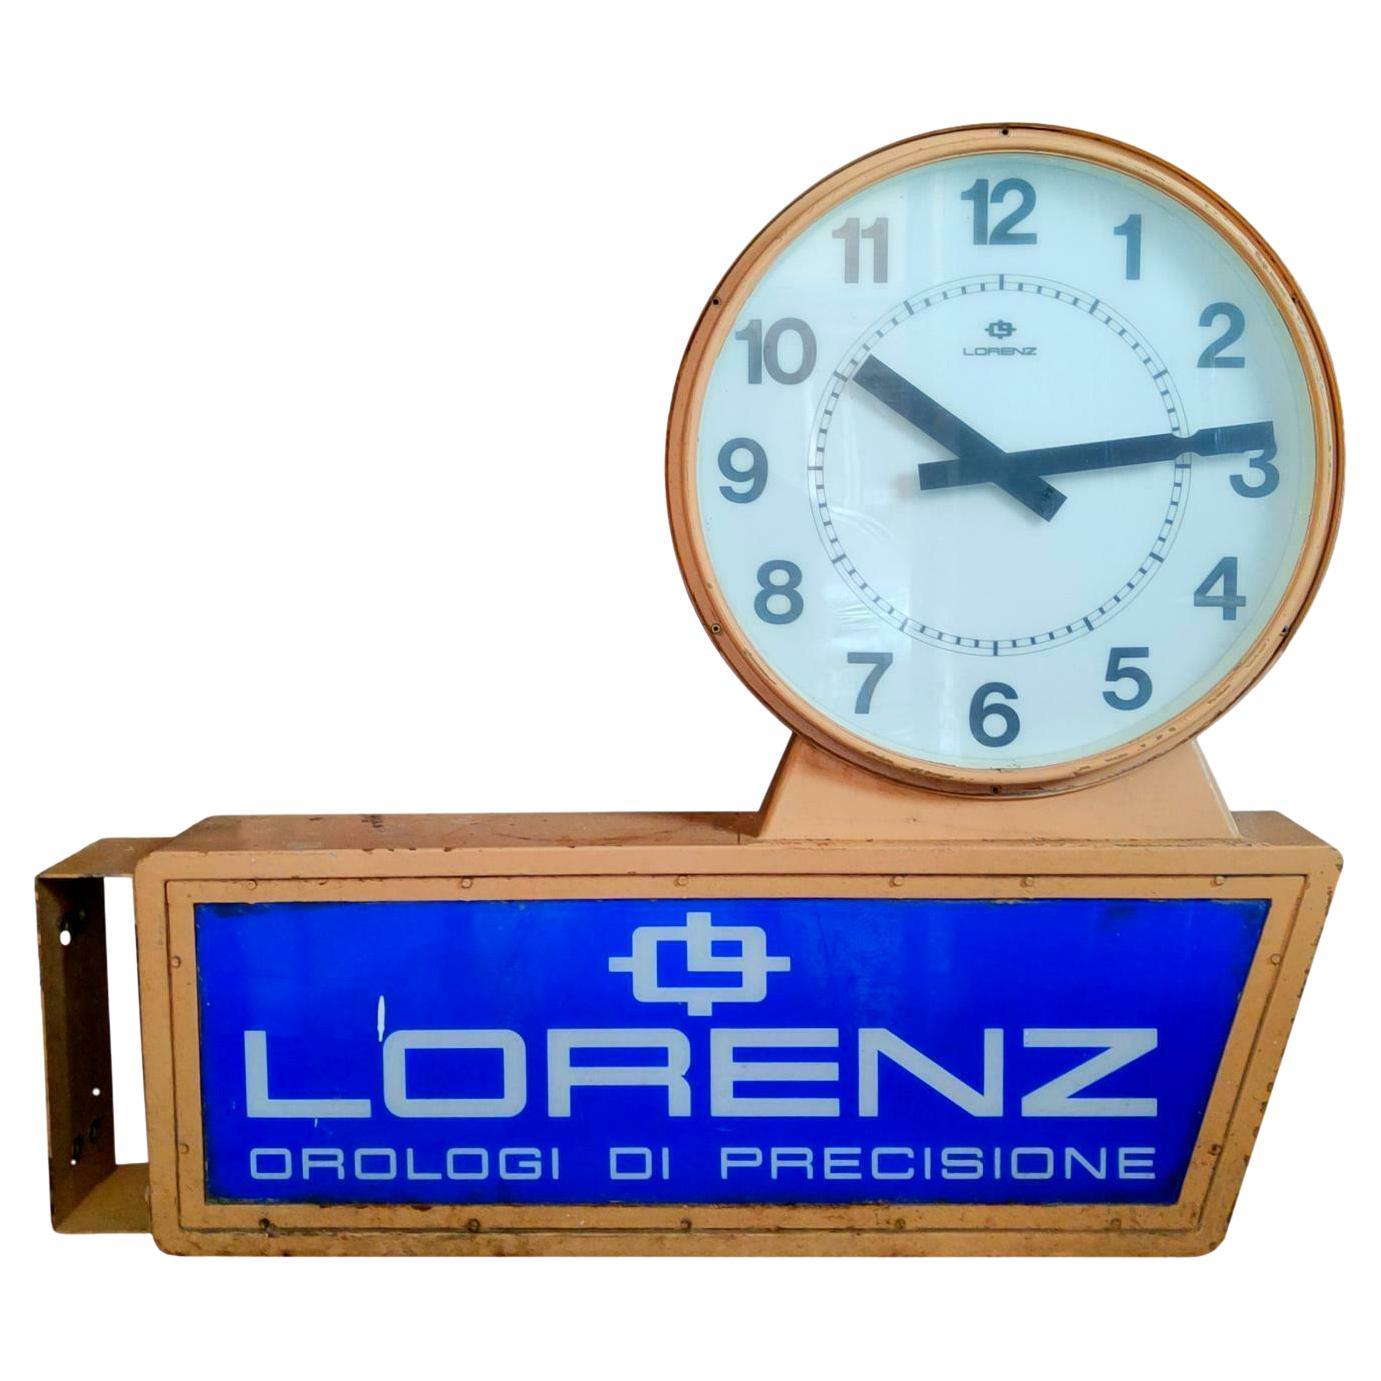 Large Double-Sided Advertising Street Clock "Lorenz" Watches, 1960s